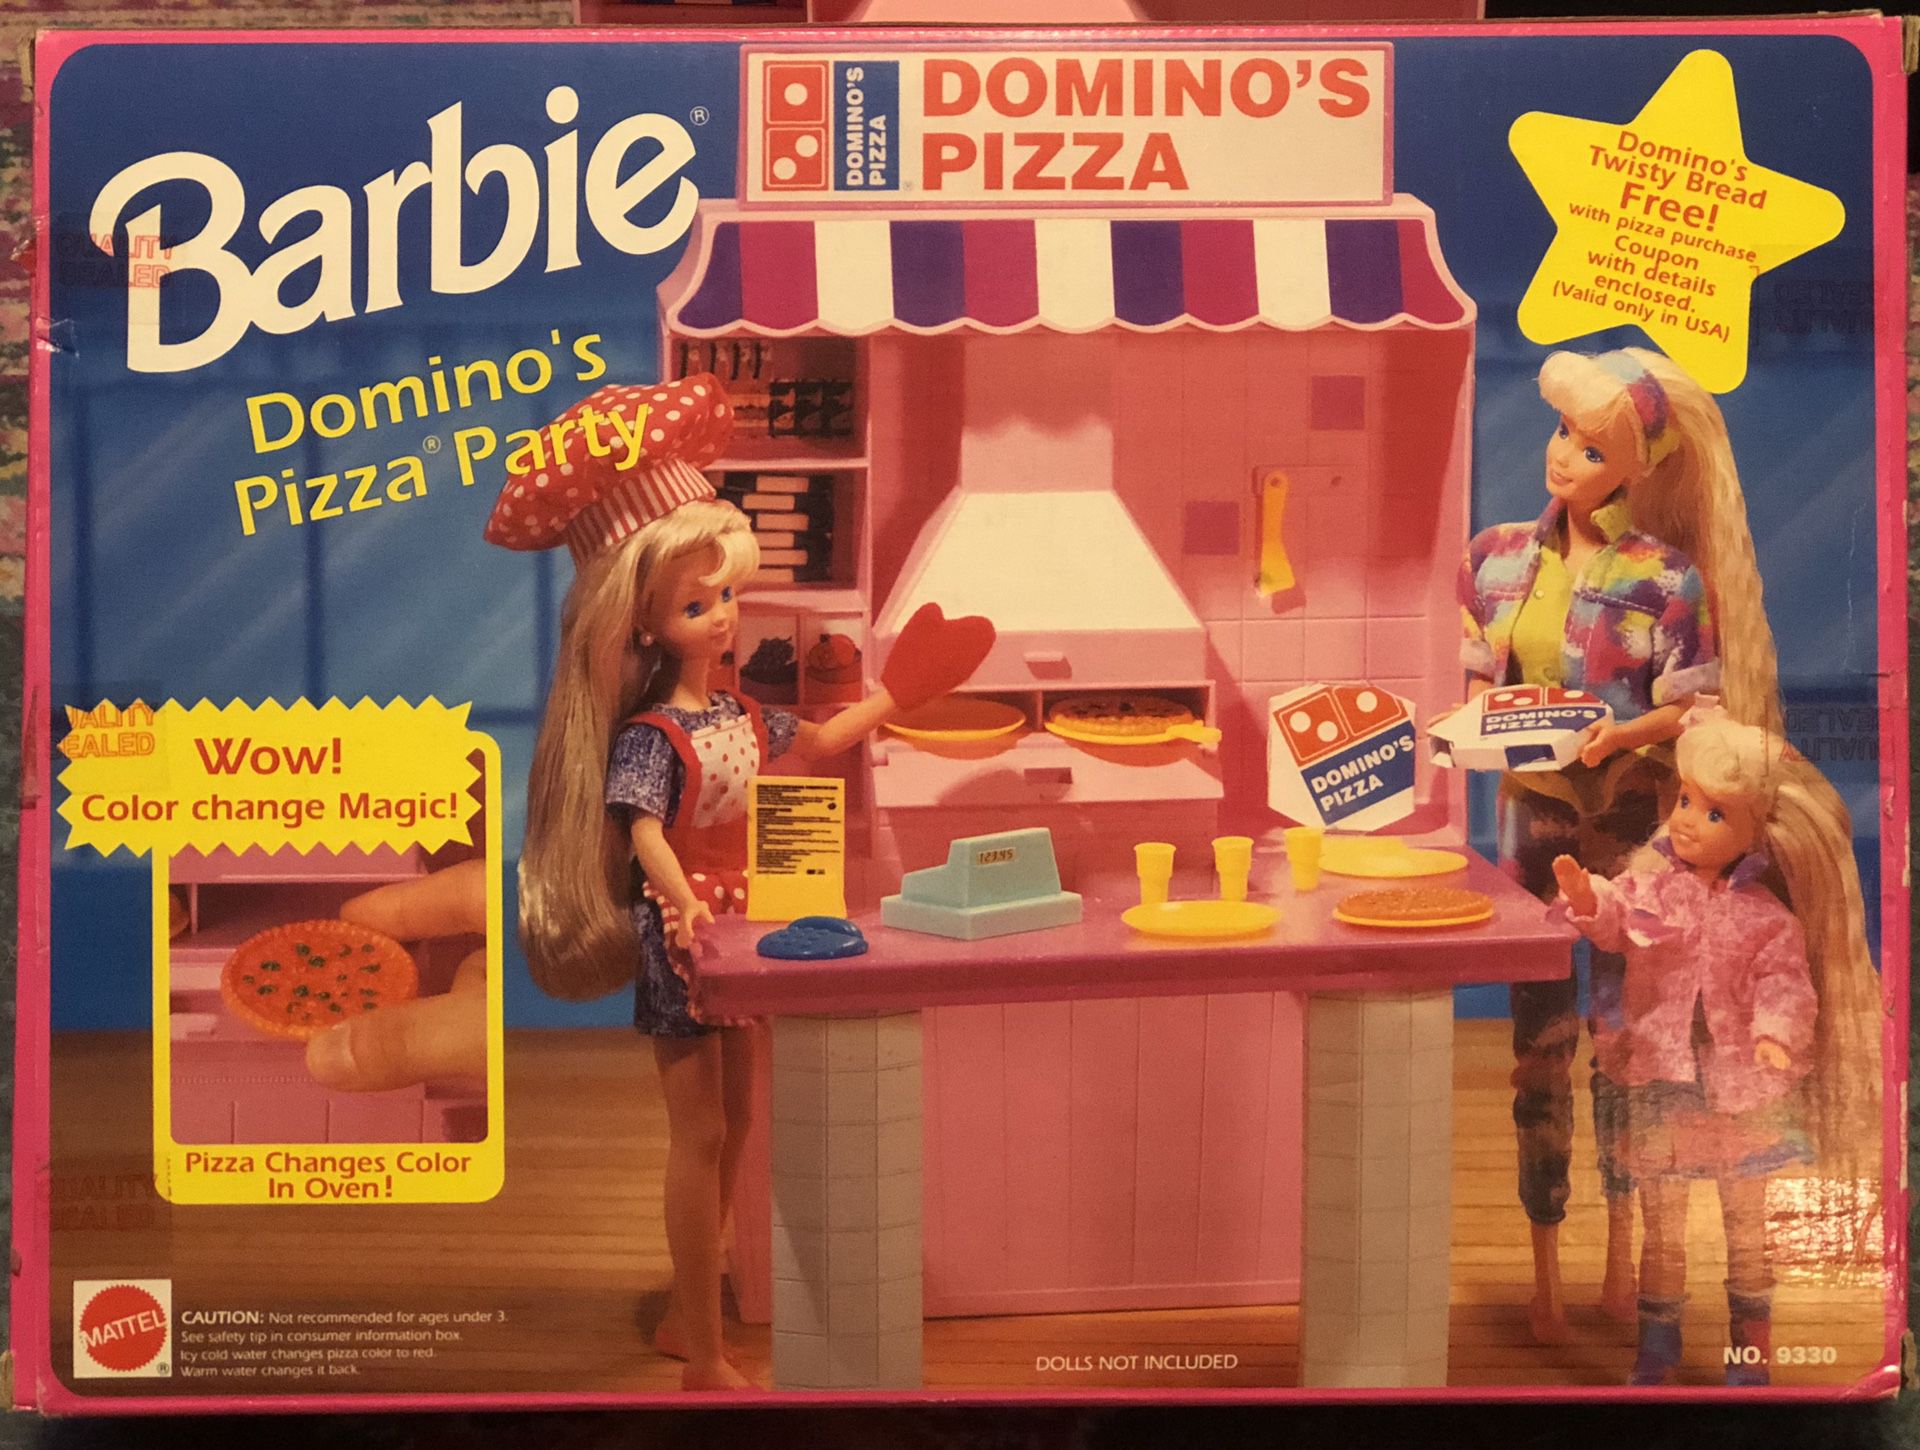 Barbie Dominos pizza party play set.